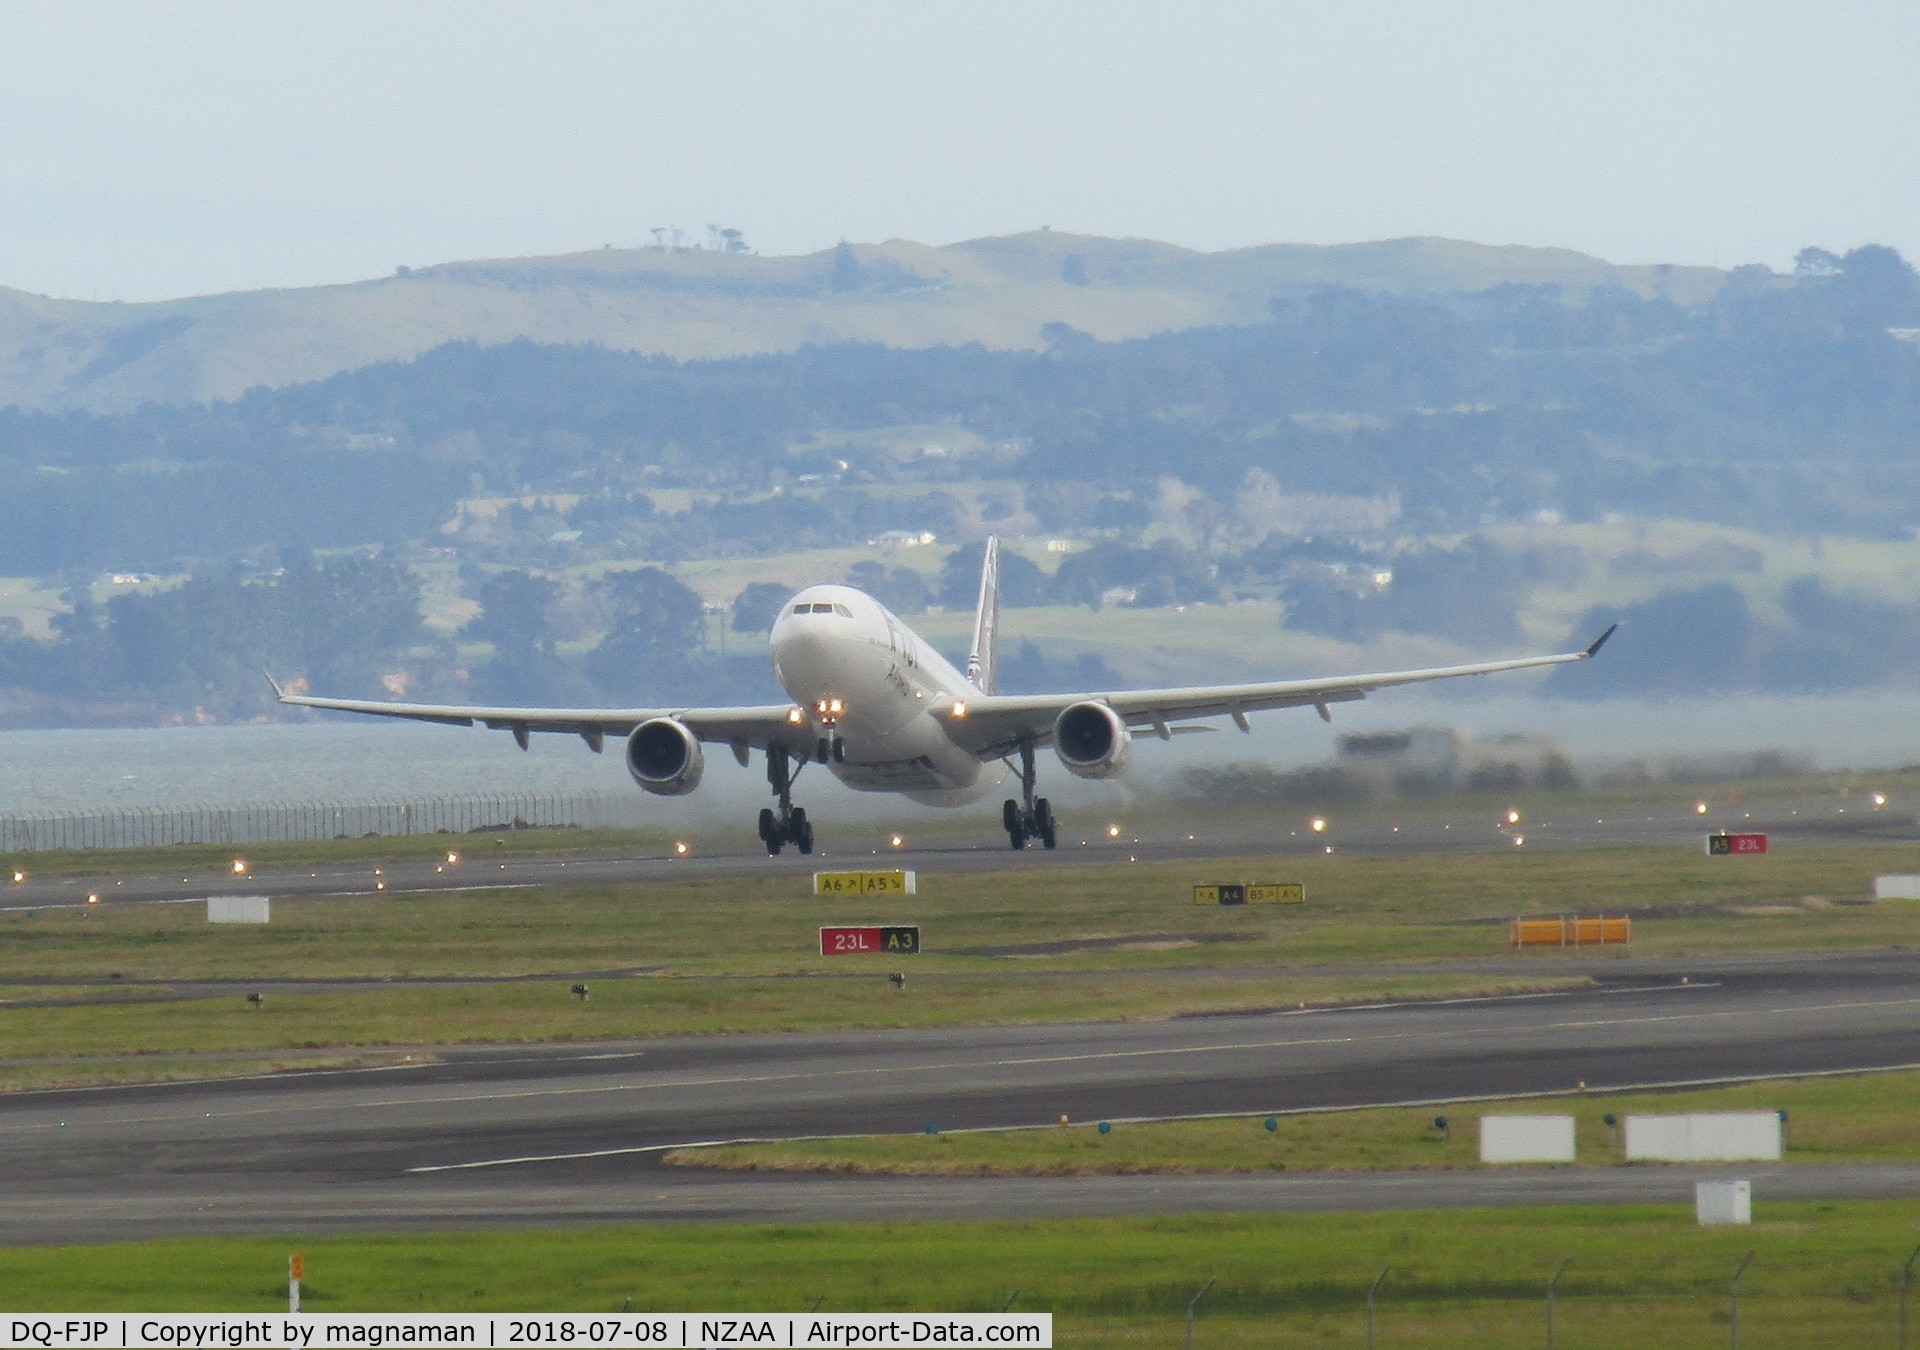 DQ-FJP, 2006 Airbus A330-203 C/N 807, Departing AKL for Nadi - new to airline